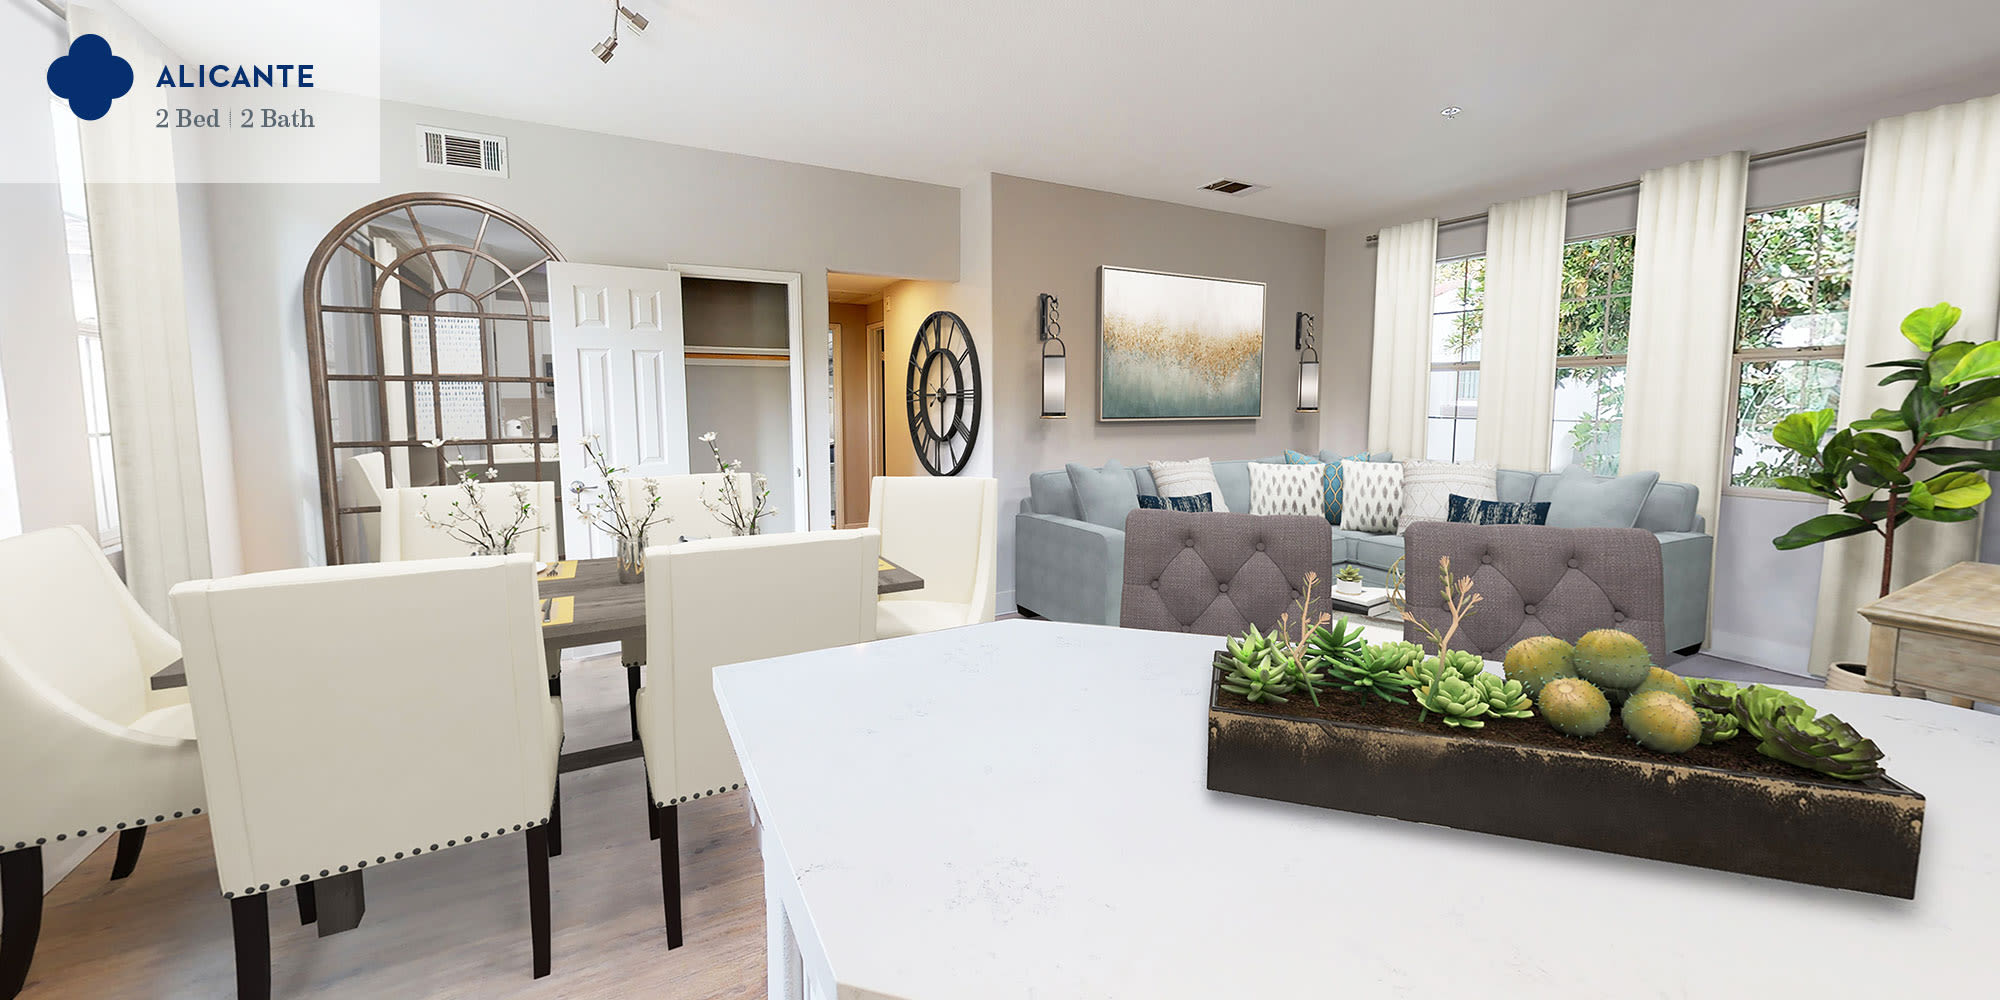 A well-furnished dining area in a two-bedroom apartment home at Mission Hills in Camarillo, California